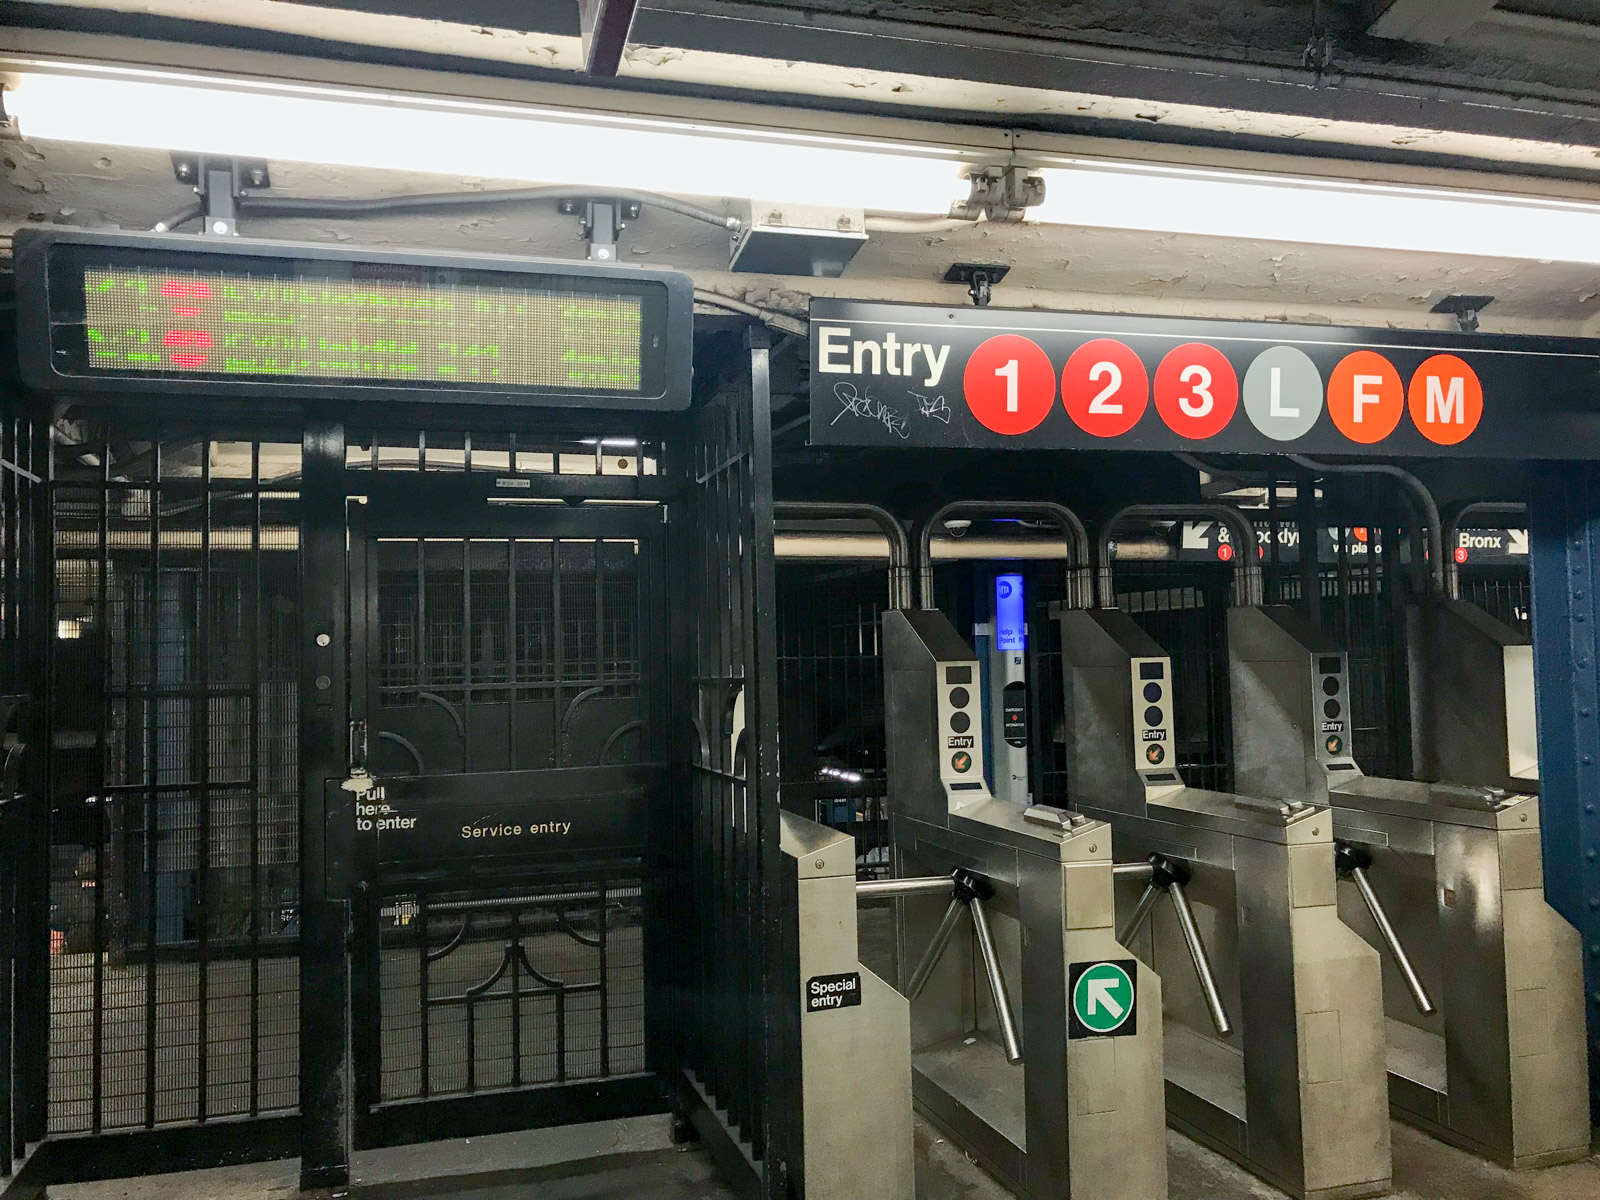 A row of turnstiles with subway lines printed on a sign above them. To the left is a black service entry/exit gate that resembles a door